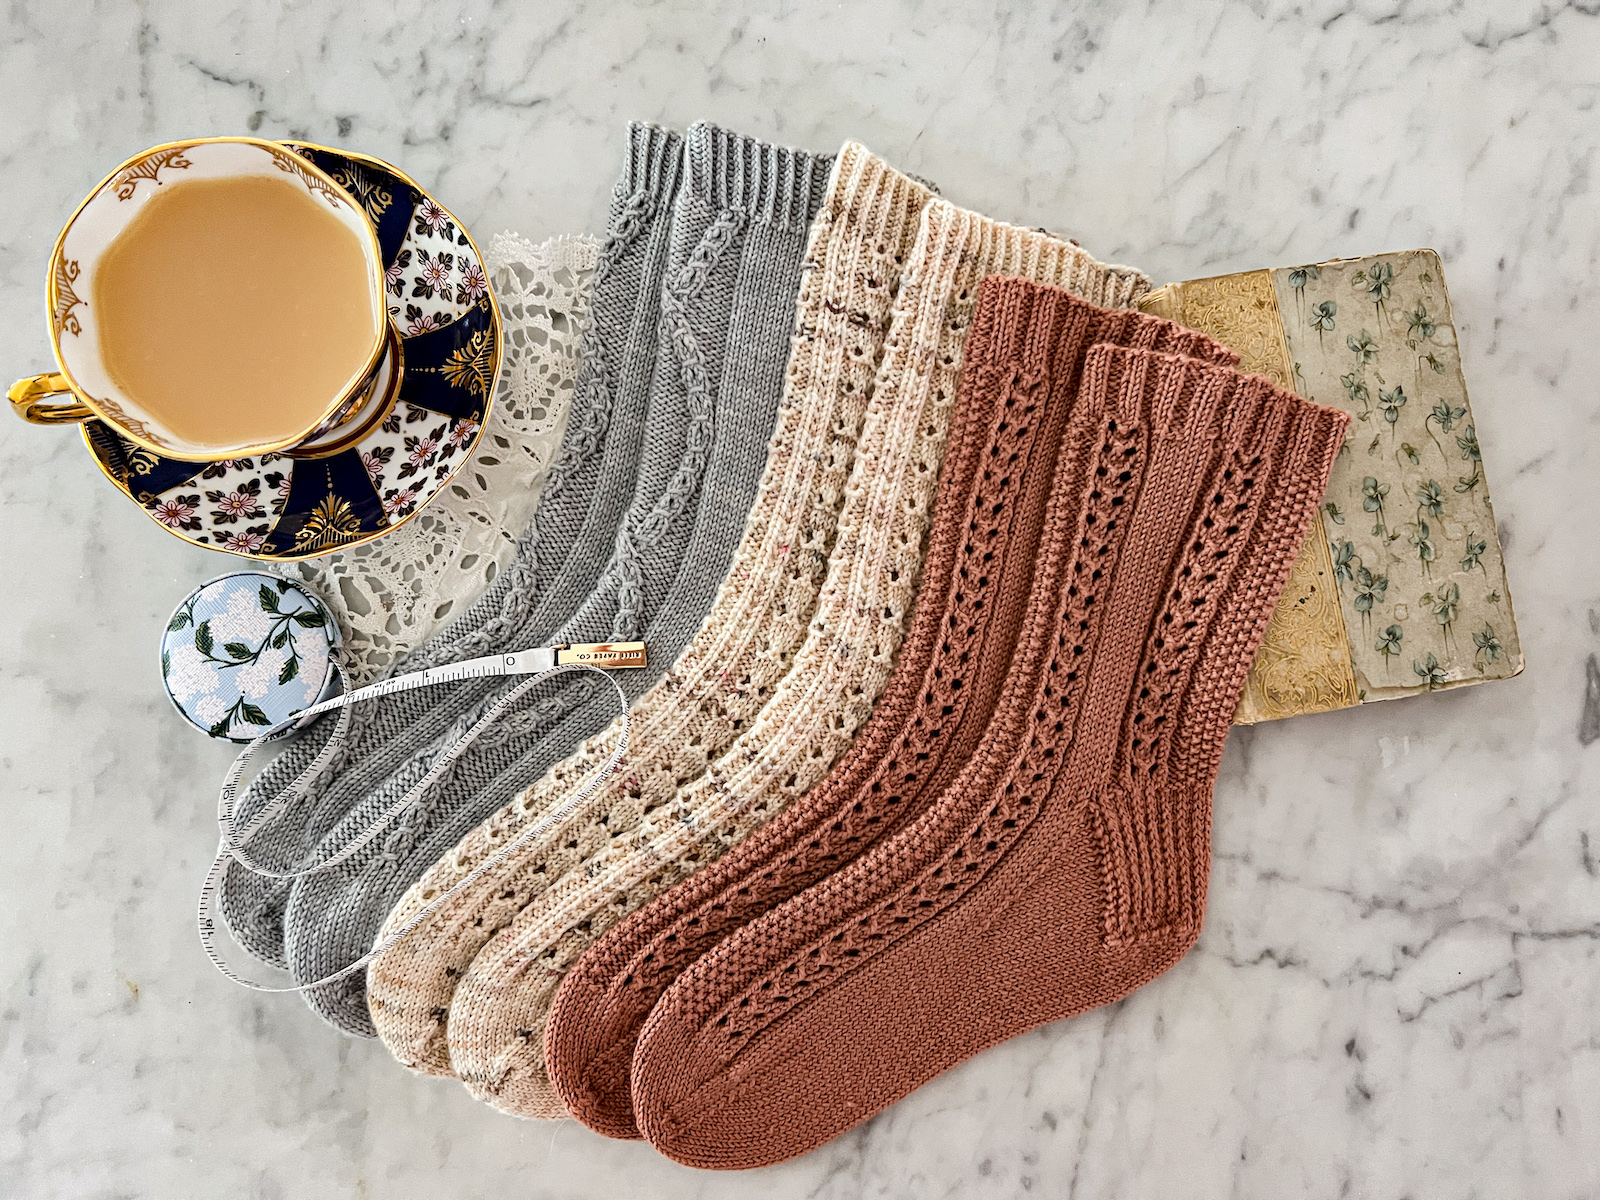 Three pairs of pastel handknit socks are laid out on a white marble countertop next to a teacup full of milky tea and an antique book. A little tape measure is spooled out across their toes.